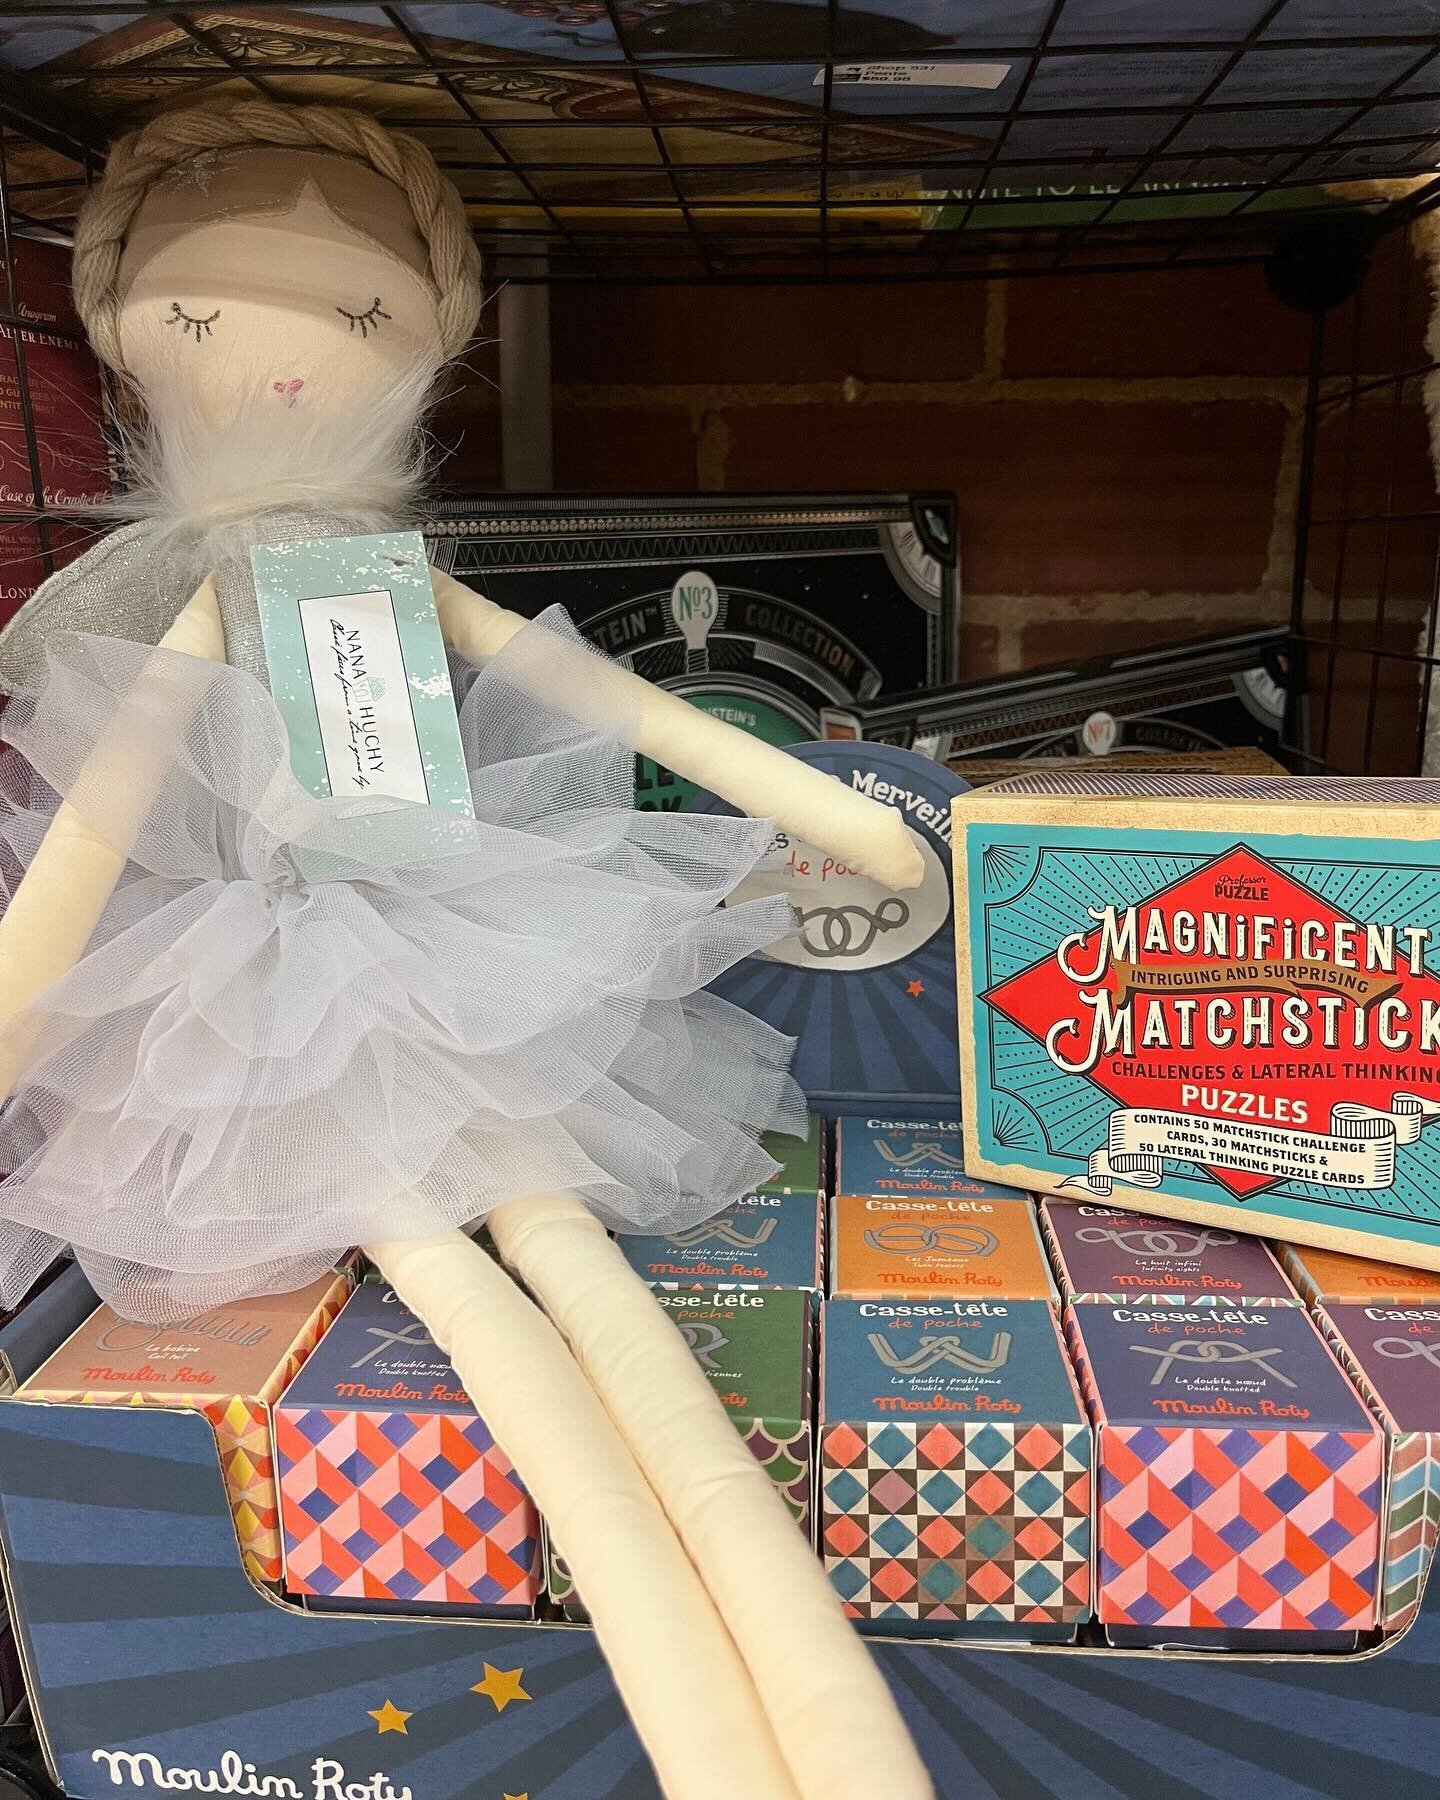 Betty Ballerina doll is not your ordinary toy. She's on a mission to solve all the tricky puzzles and brainteasers out there! You can find this adventurous doll at The Vintage Toy Box, located within Dirty Janes Canberra. This specialist store shoppi